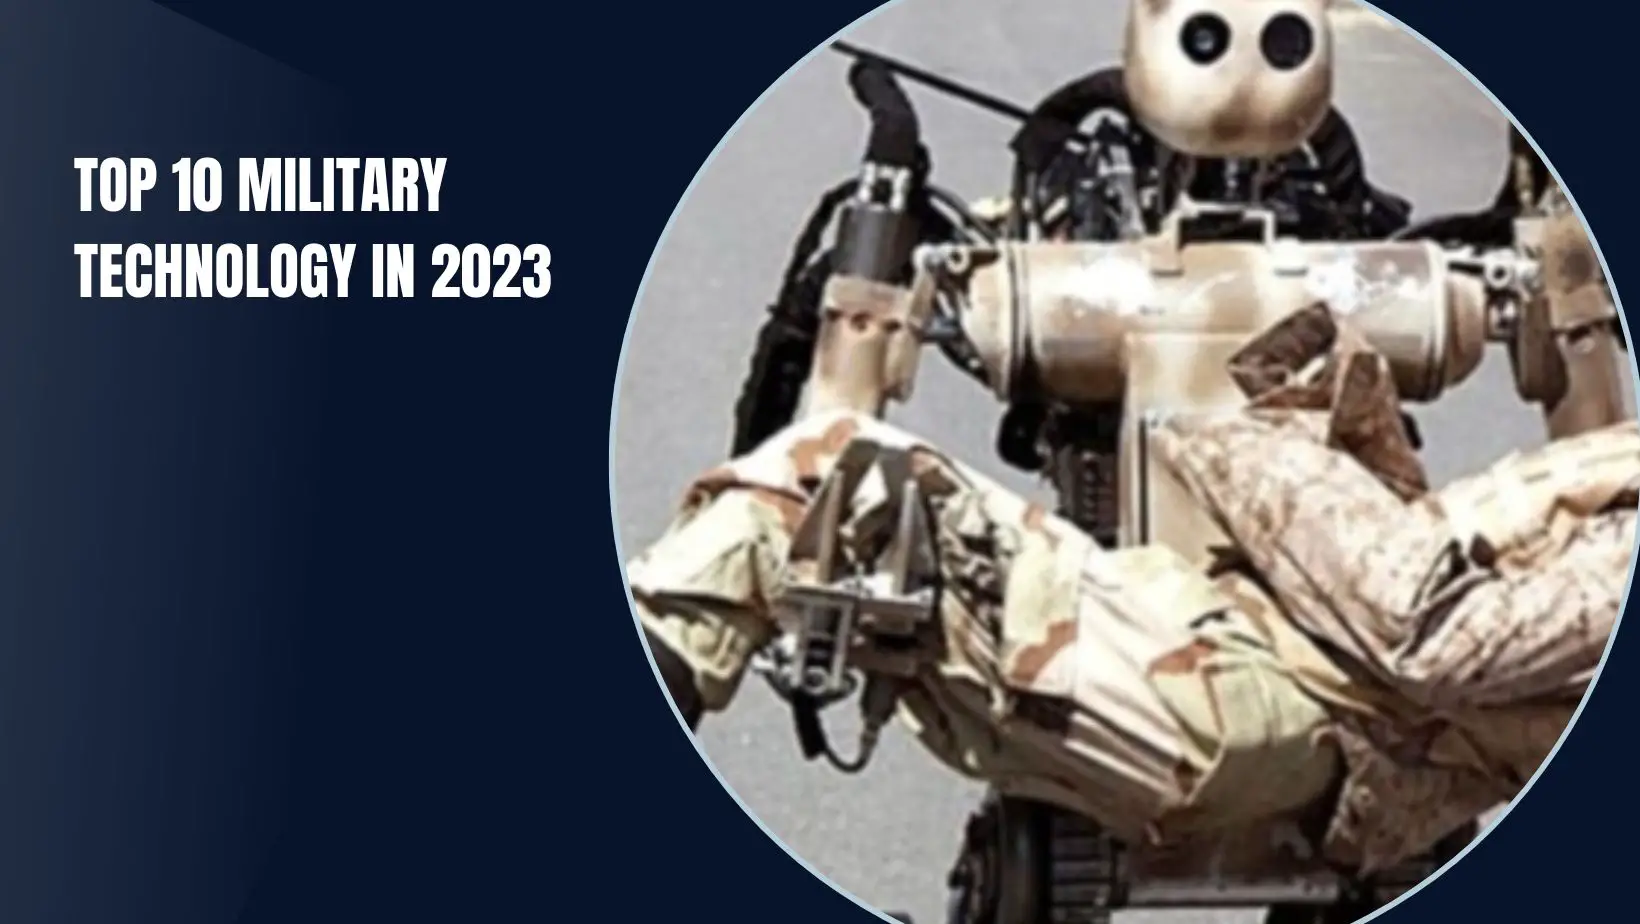 Top 10 Military Technology In 2023